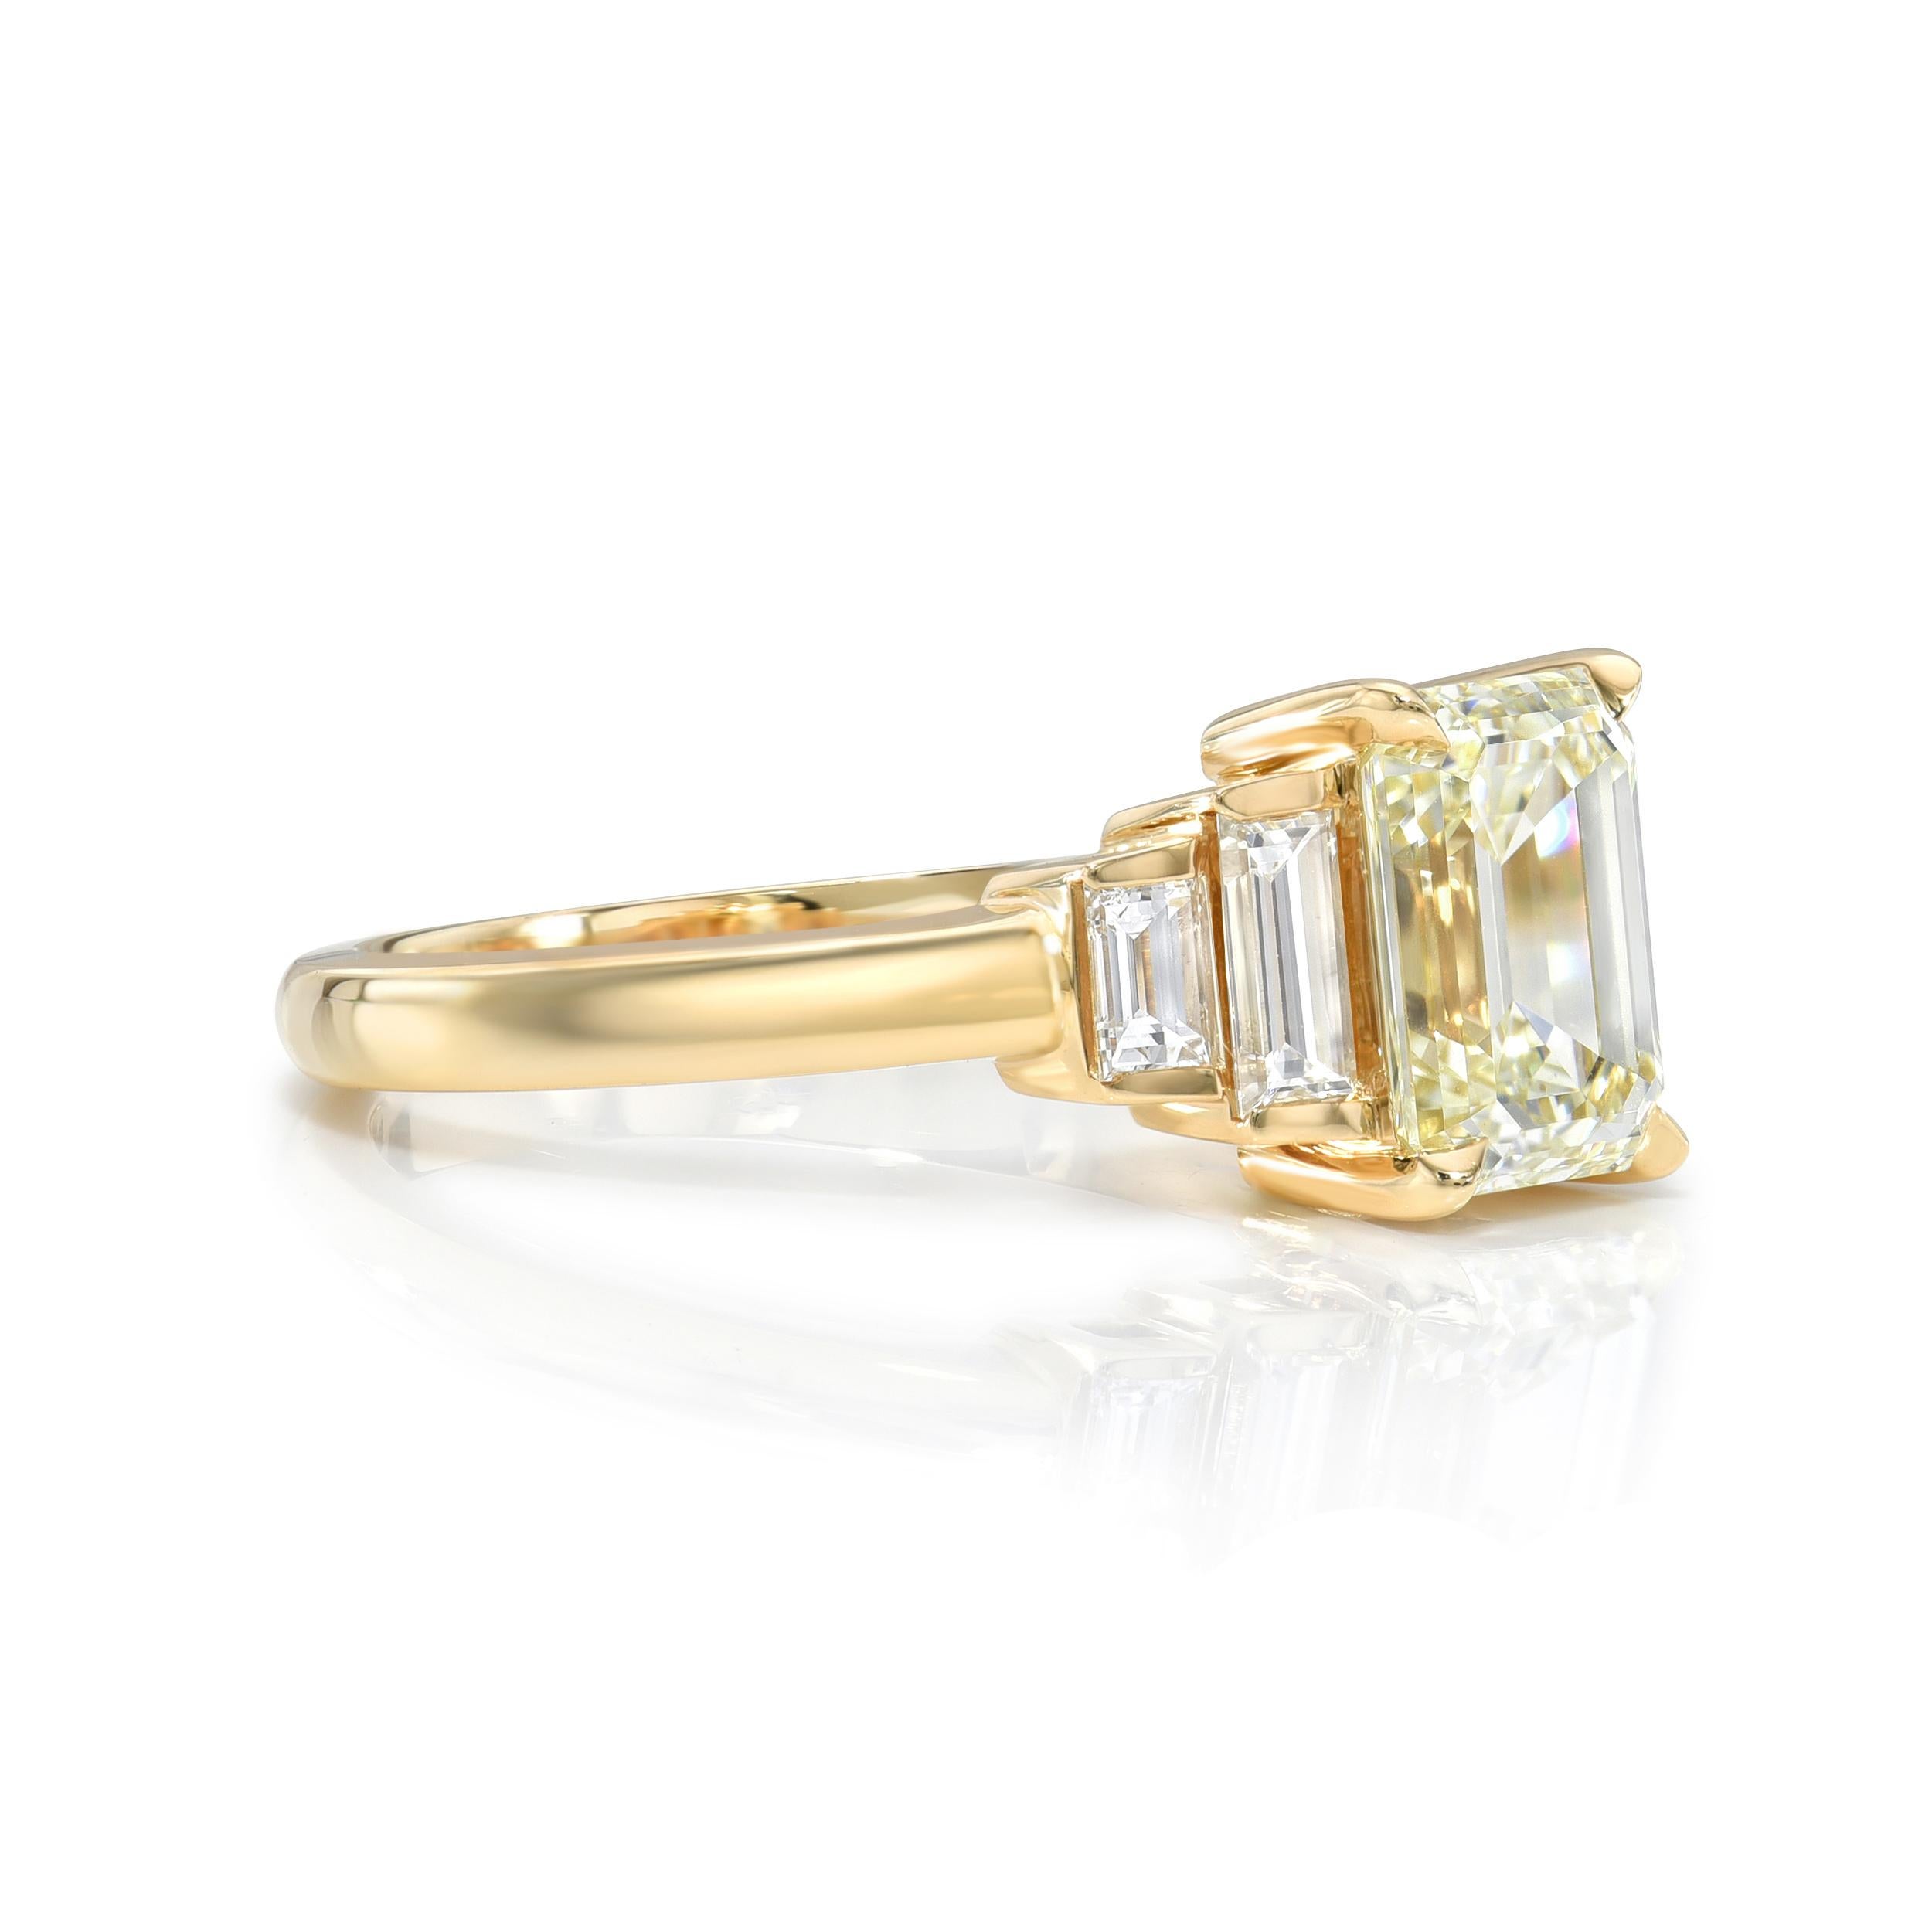 1.50ct M/VVS1 GIA certified emerald cut diamond with 0.39ctw baguette cut accent diamonds prong set in a handcrafted 18K yellow gold mounting.